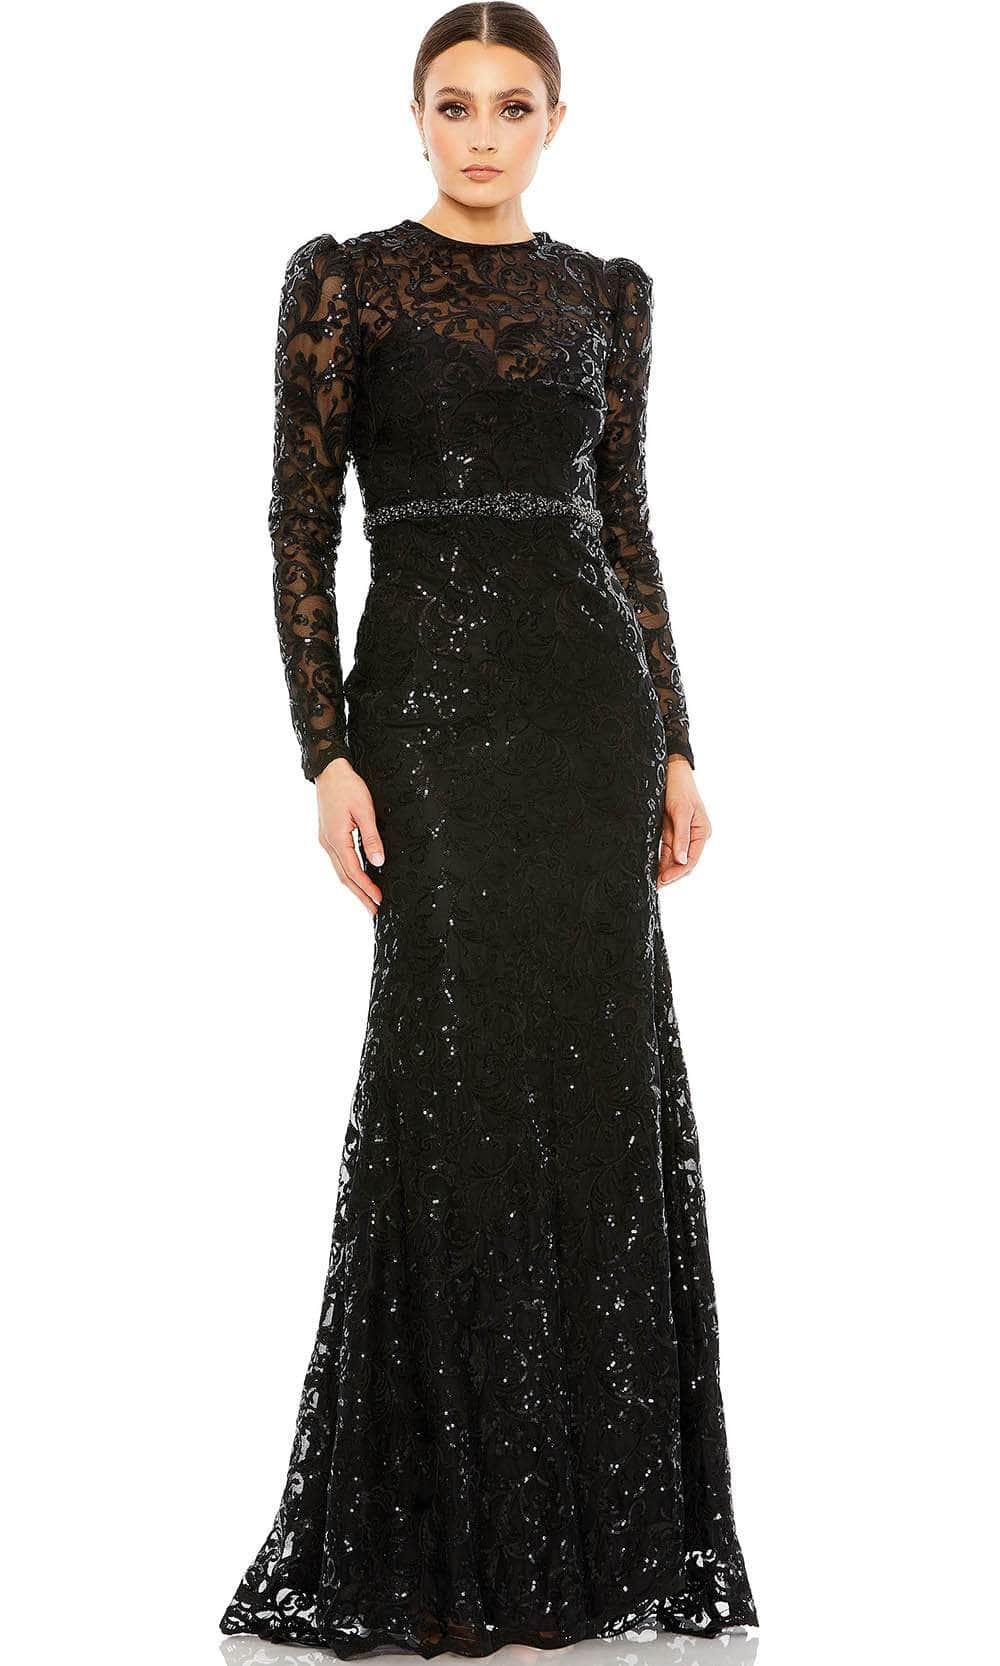 Image of Mac Duggal 68011 - Sequin Sheath Mother of the Bride Dress